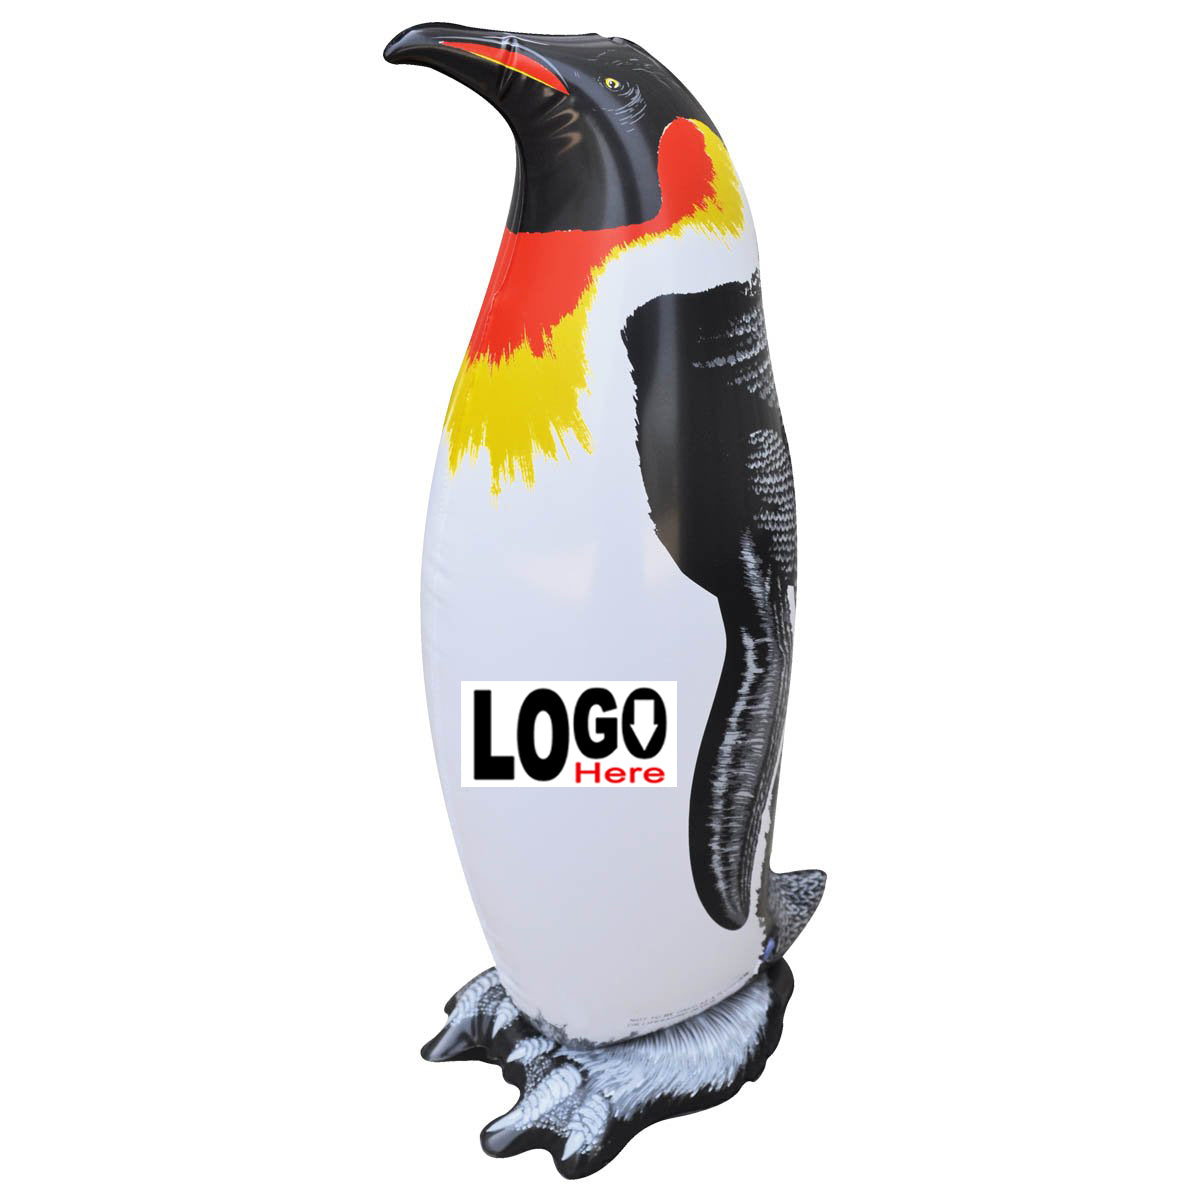 Inflatable Penguin, 20 inch Tall [AN-PENGUIN]